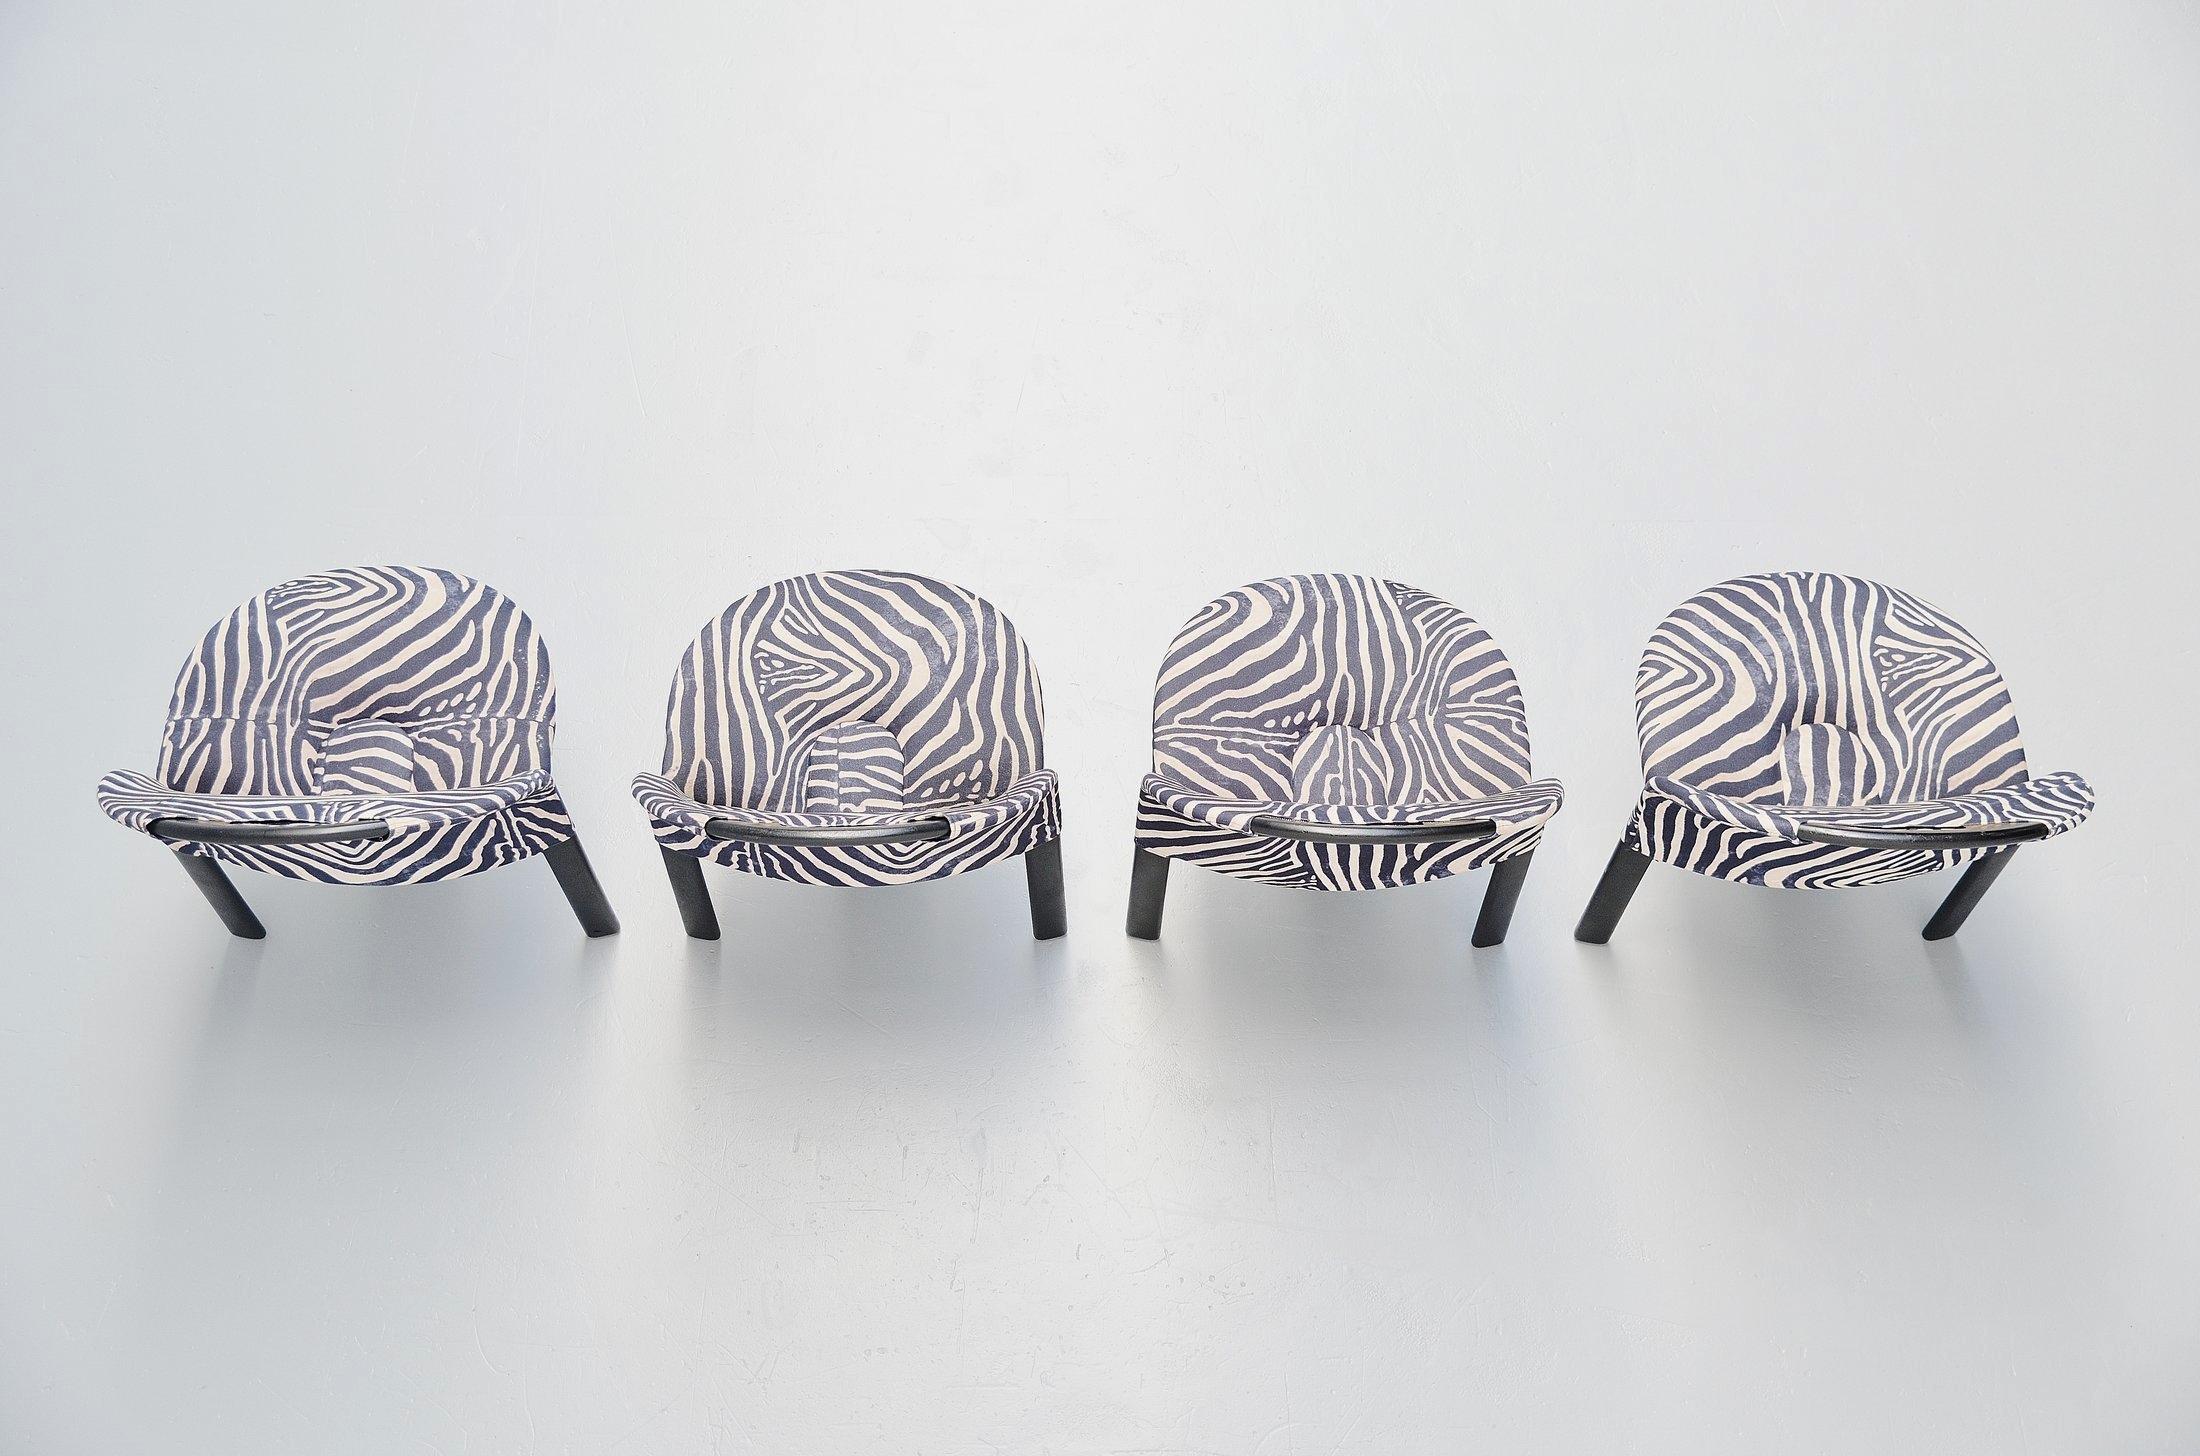 Cold-Painted Giovanni Offredi Sail Chairs Saporiti, Italy, 1973